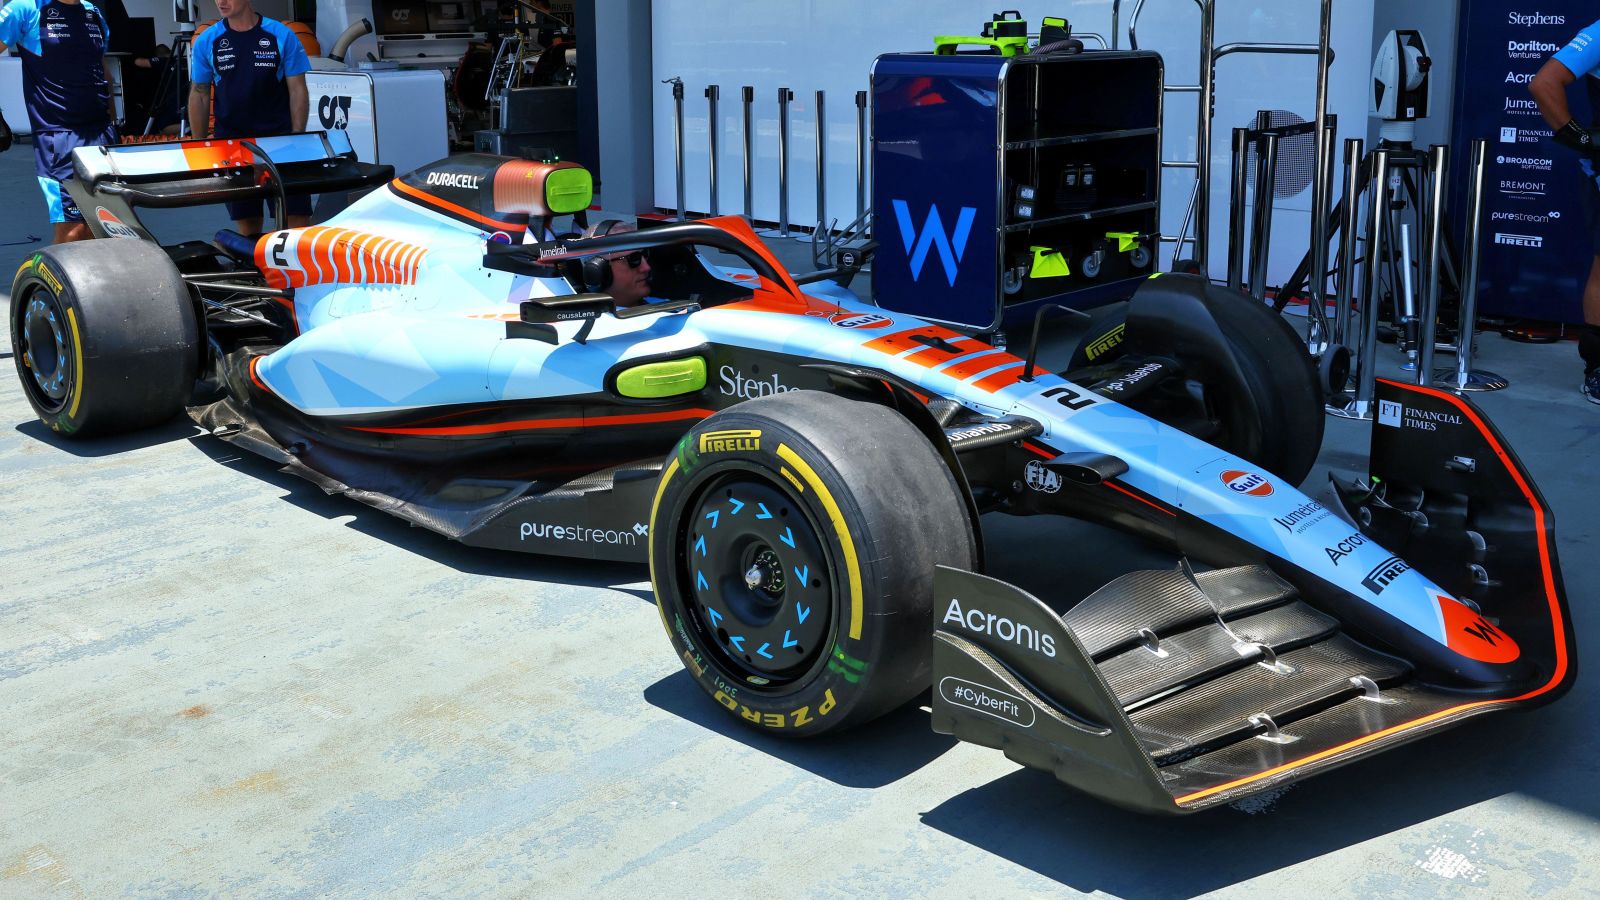 Williams Gulf livery appears for the first time in the Singapore Grand Prix pit lane.